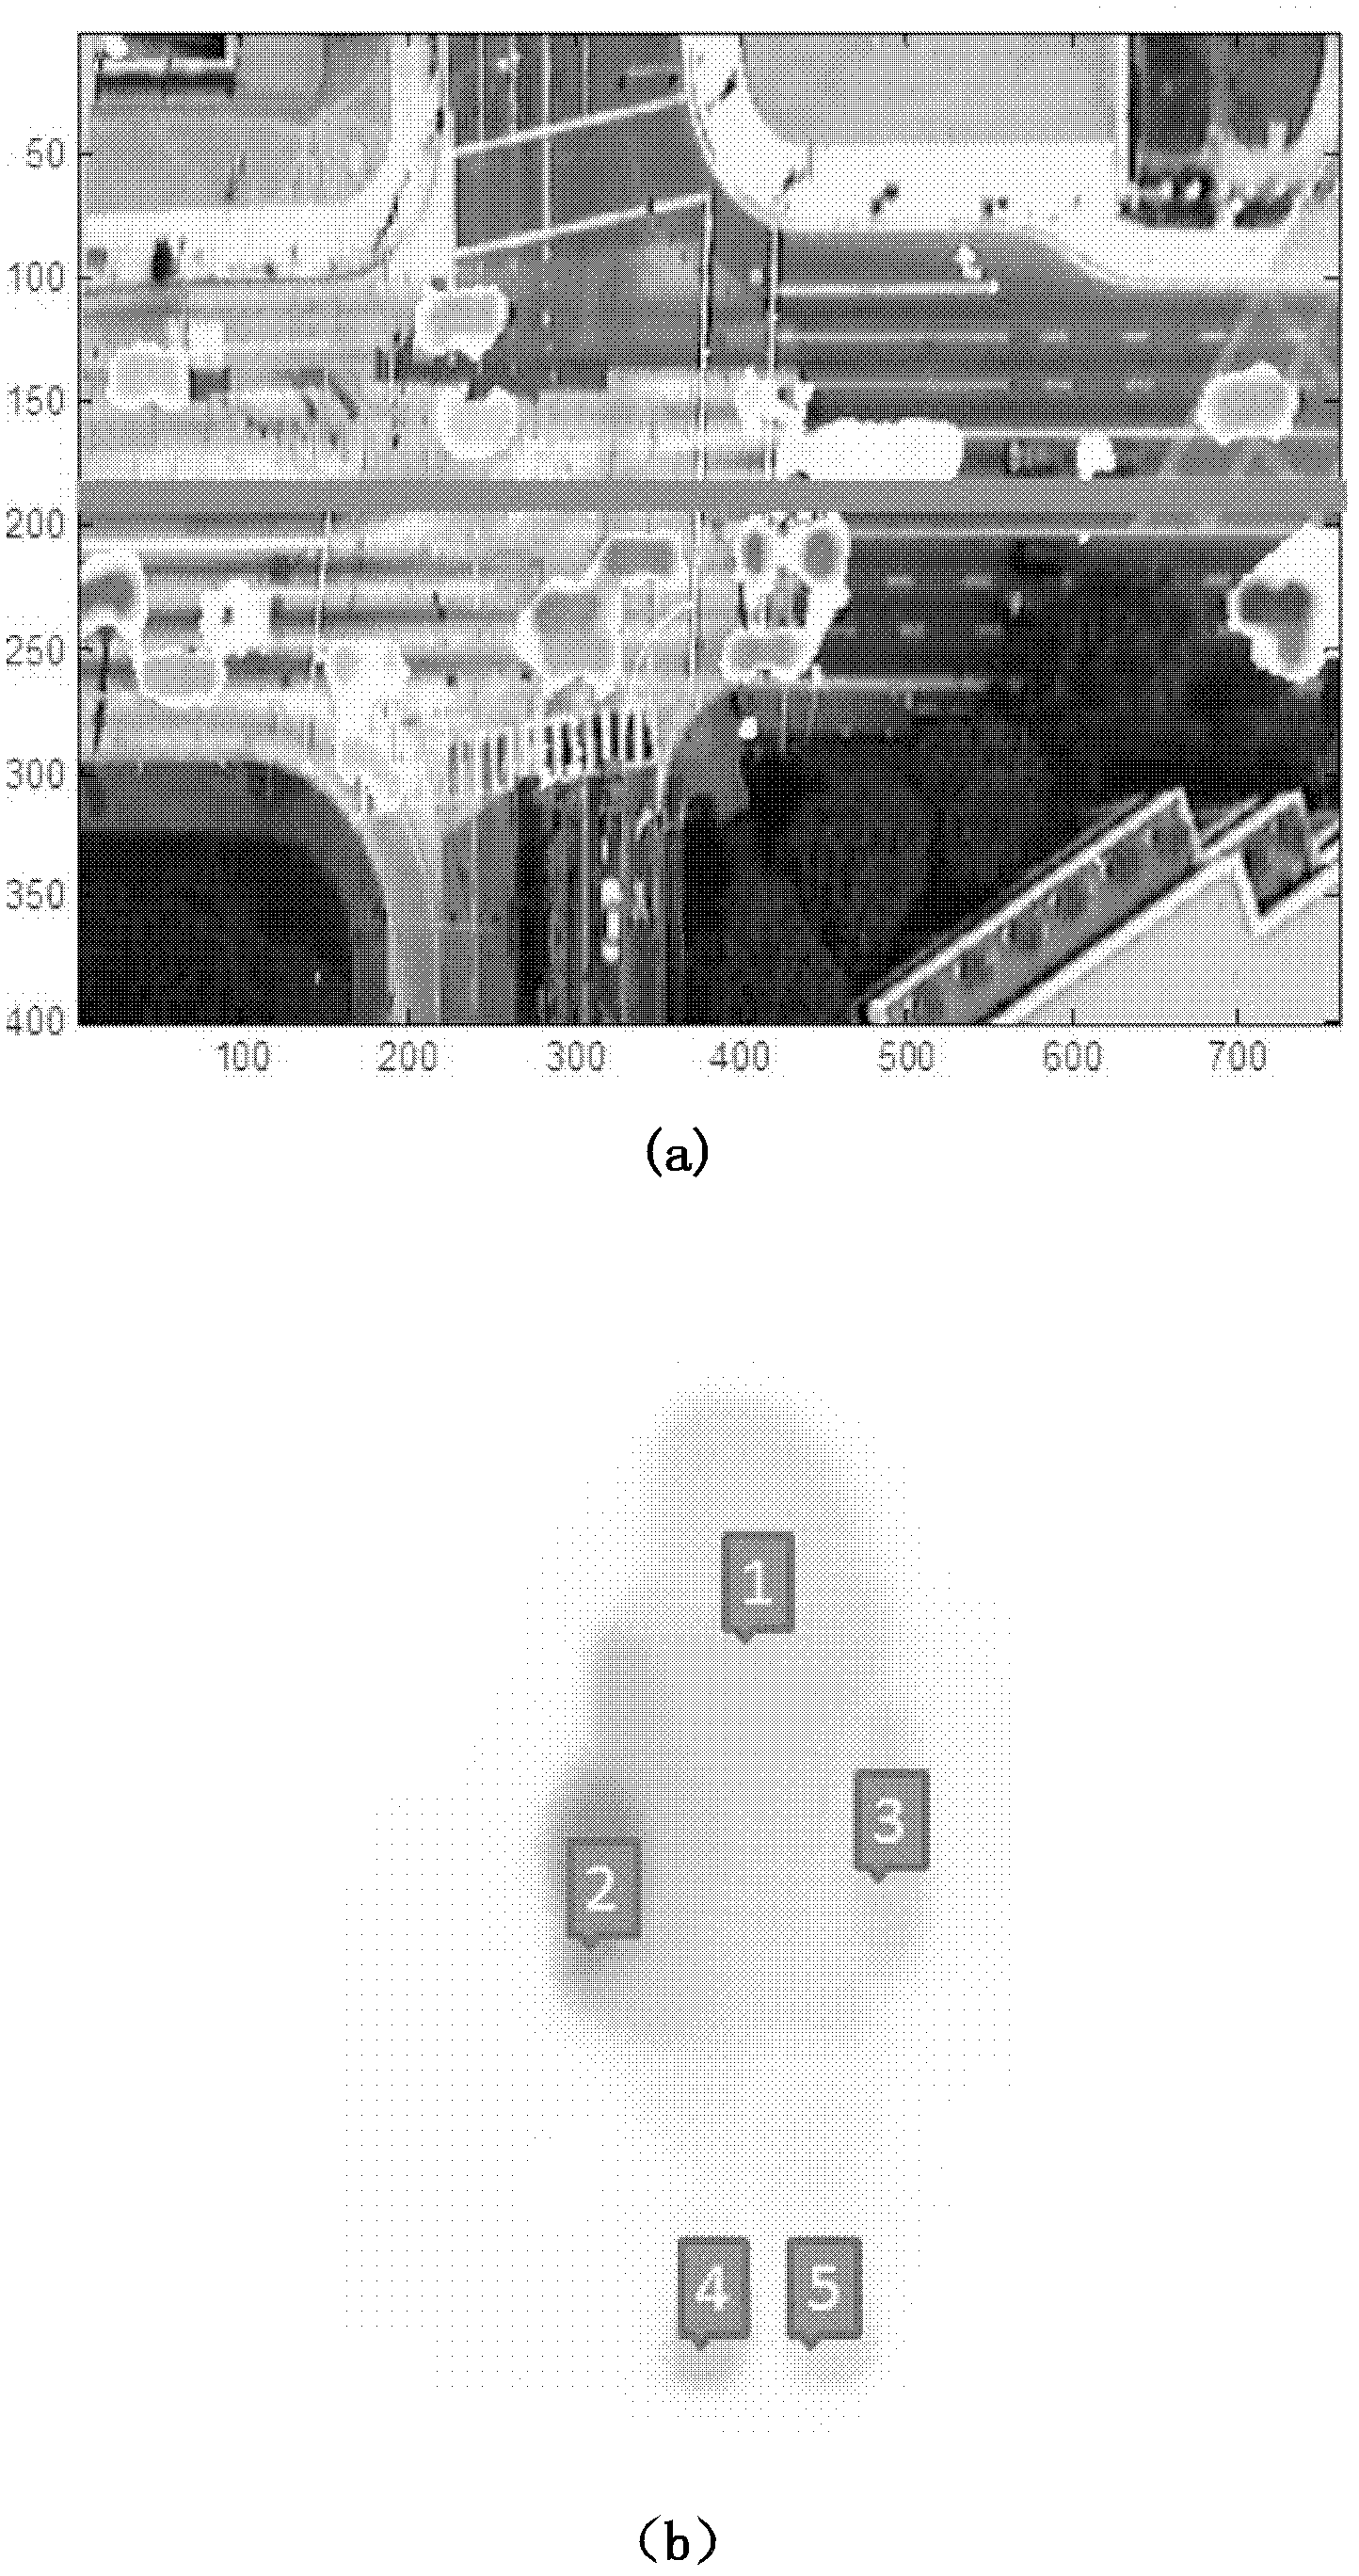 Method for motion pattern classification and action recognition of moving target